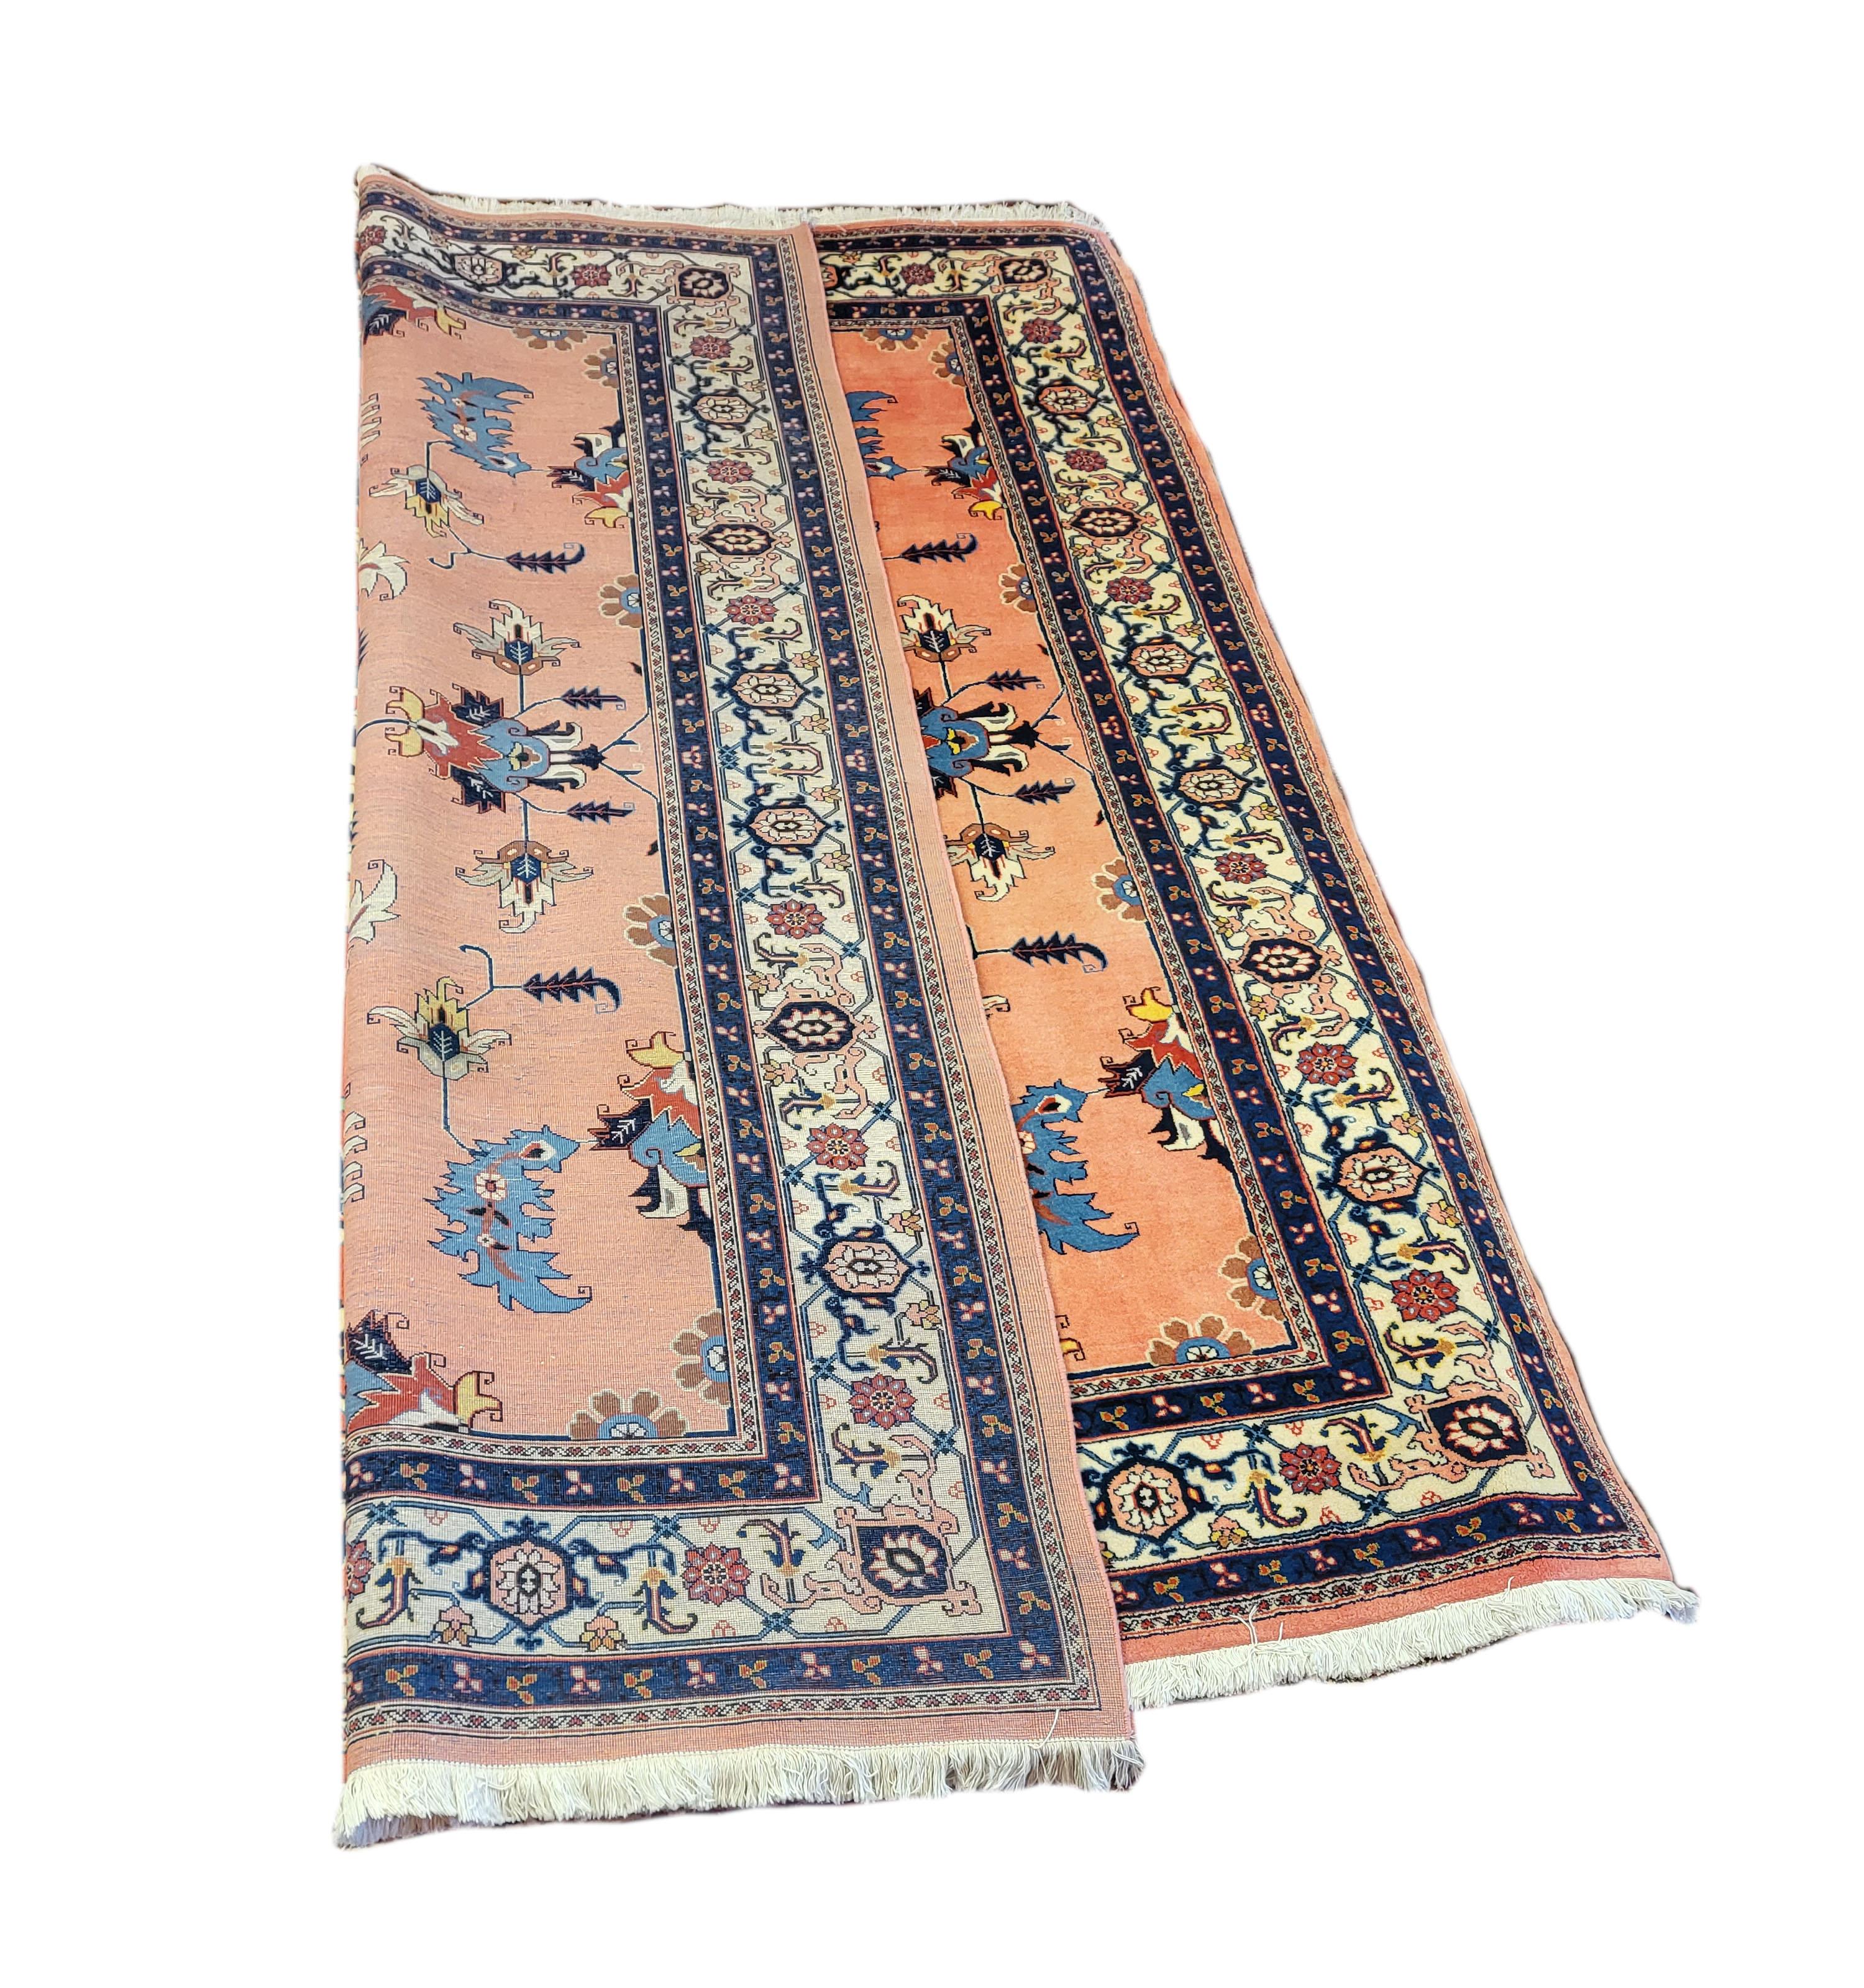 Incredibly rare 60's Persian Heriz. This is a Heriz like no other! Heriz rugs are the most popular Persian rug in the world. If you want a Heriz that stands out, then this is the rug for you! It's rare to see pink in Persian rugs, especially in a